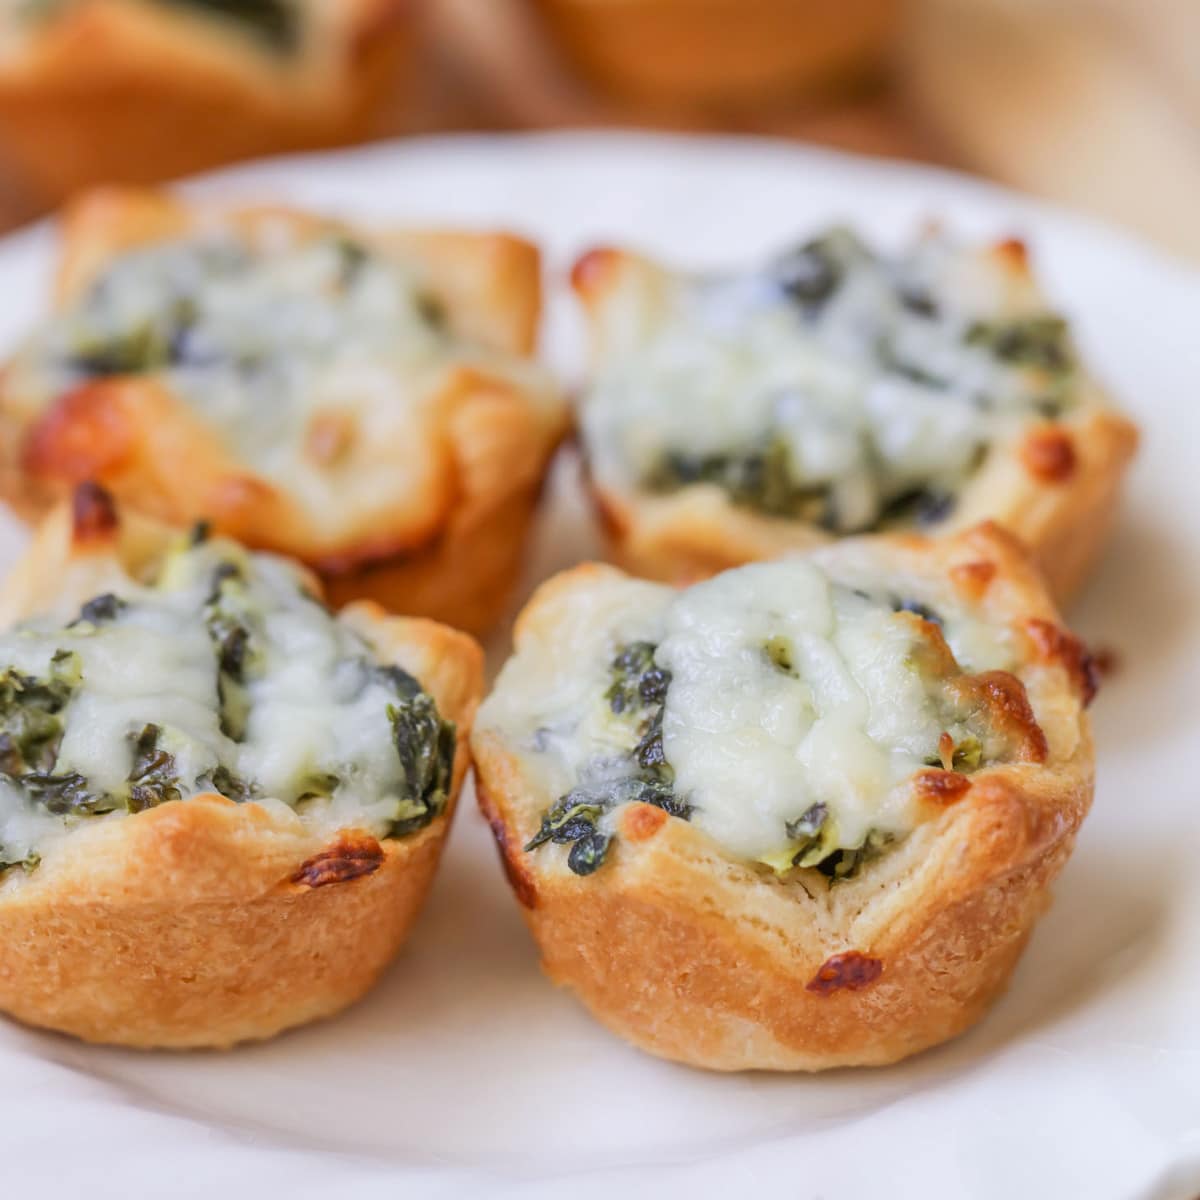 Thanksgiving dinner ideas - several spinach dip bites served on a plate.